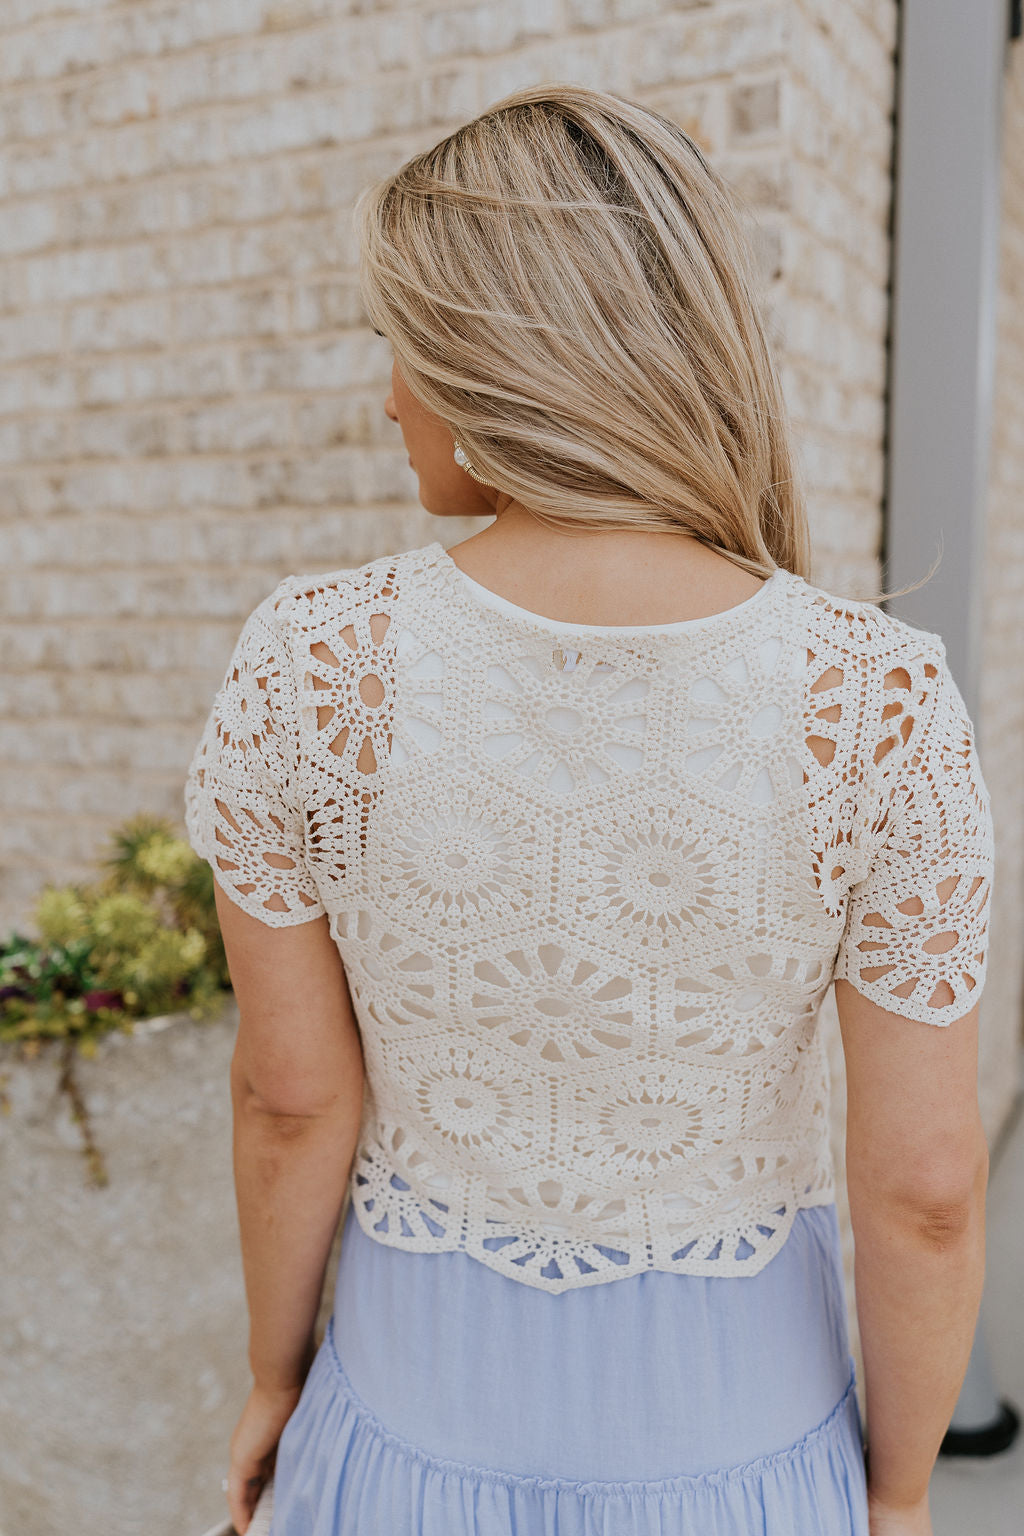 Back view of female model wearing the Brynlee Cream Crochet Scallop Top which features Cream Crochet Fabric, Cropped Waist, Round Neckline and Short Sleeves